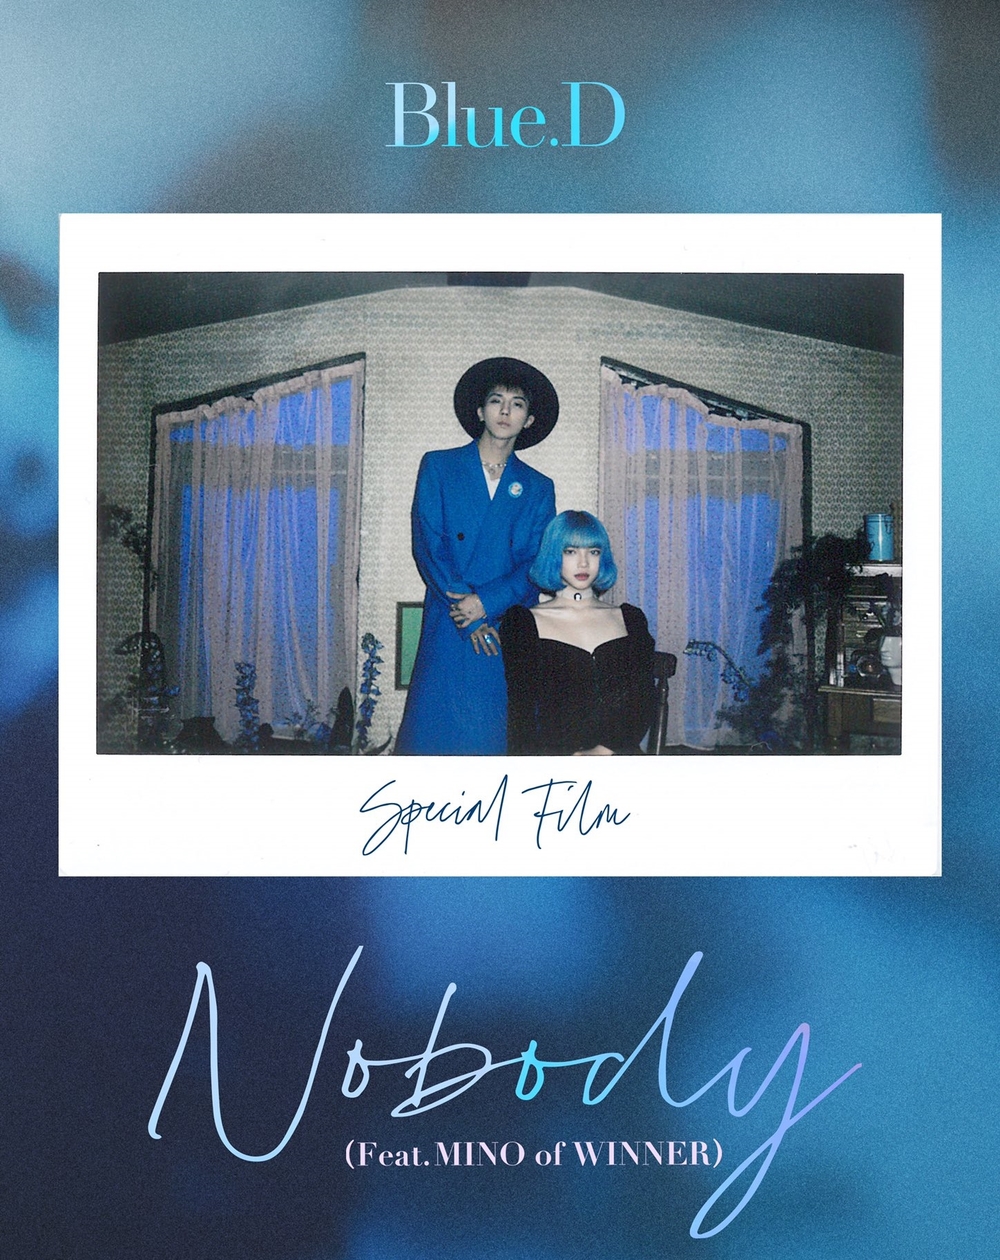 The tone Queen and Feature Fairy met; singer Blue.D made his brilliant debut, fueled by support fire from group WINNER member Song Min-ho (MINO).Bluedy released its first single, Nobody (NOBODY), on December 2 at 12:00 p.m. on the sound source site.Bluedy is a new singer introduced by YGX, and attracted the attention of music fans by releasing various cover videos through YouTube before debut.Especially, it started with the song Hum, which was released in November last year, the first solo album XX by Song Min-ho, and the Gruby Room single This Night released in January this year, and the Jekskis leader Eun Ji-won solo album G1 (support) title song IM ON FIRE released in June. He participated in the vocal feature and was recognized for his charming tone.The first solo song by Bluedy to be released under his name, Nobody, is a song of the pop R & B genre, co-written by The Choice37 (CHOICE37) and Bekuh BOOM and the Year (HAE), Jaybo (ZAYVO) and Song Min-ho.The lyrics were written by Bekuh BOOM, Se.A, Jaybo, LIL G and Song Min-ho and The Choice37, and the arrangements were performed by Sun and The Choice37.It is an impressive song with rising melodies, musical instruments, and attractive vocals. Before the official release, some of the songs were released on TVN entertainment program Shin Seo Yugi 7.The lyrics contain a story of unrequited love that anyone would have experienced once.Bluedy said, I didnt even think about it./I didnt even feel anything at all/I think it changed/I dont even know when/Kiss me I dont think about you. My heart/I want you. Nobody Nobody Nobody I think my eyes are blinded. / Nobody Nobody Nobody I think you are blank / I already know you are like me. The wrap feature is also an indispensable point of observation.Song Min-ho, who has been busy with his new album work, overseas tour, and TVN Shin Seo Yugi 7 shooting, has also participated in the songwriting and composition of NOBODY and has also played a role as a feature.Song Min-ho, who has been working as a Feature rapper for several singers, including Epik High BORN HATER (Bon Heiter), Ihai WORLD TOUR (World Tour), Epik High No Thank You and Jamez Alchemy, has been featured in this years Eun Ji-won sixth solo album G1 Starting with AN (Hooligan), he played four songs, including HOOLIGAN (Hooligan), WINNER Kim Jin-woos first solo single JINUs HEYDAY (Jinus Hayday, the heyday of Kim Jin-woo) and NOBODY of Bluedy, which resulted in the fruit of Fever Day.Song Min-ho, who opened the door with his signature sound, MINO, said, Ive never seen the ivory minty/one piece look so/gorgeous/scented/scented and puffed off today./ Ive put off work today/Im not even a sleeper in front of you/I cant even sleep/skinship/hands too obvious/ Im afraid to do it / Its funny to do it / Now, Im studying you again before elementary school / ending , adding to the fun of listening with unique sense of lyrics, charming tone, and accurate pronunciation.The music video, which was released along with the sound source, enhances the immersion in the song. Bluedi appeared in a music video with a framed sensational production, and matched with model Ahn Jae-hyung.hwang hye-jin